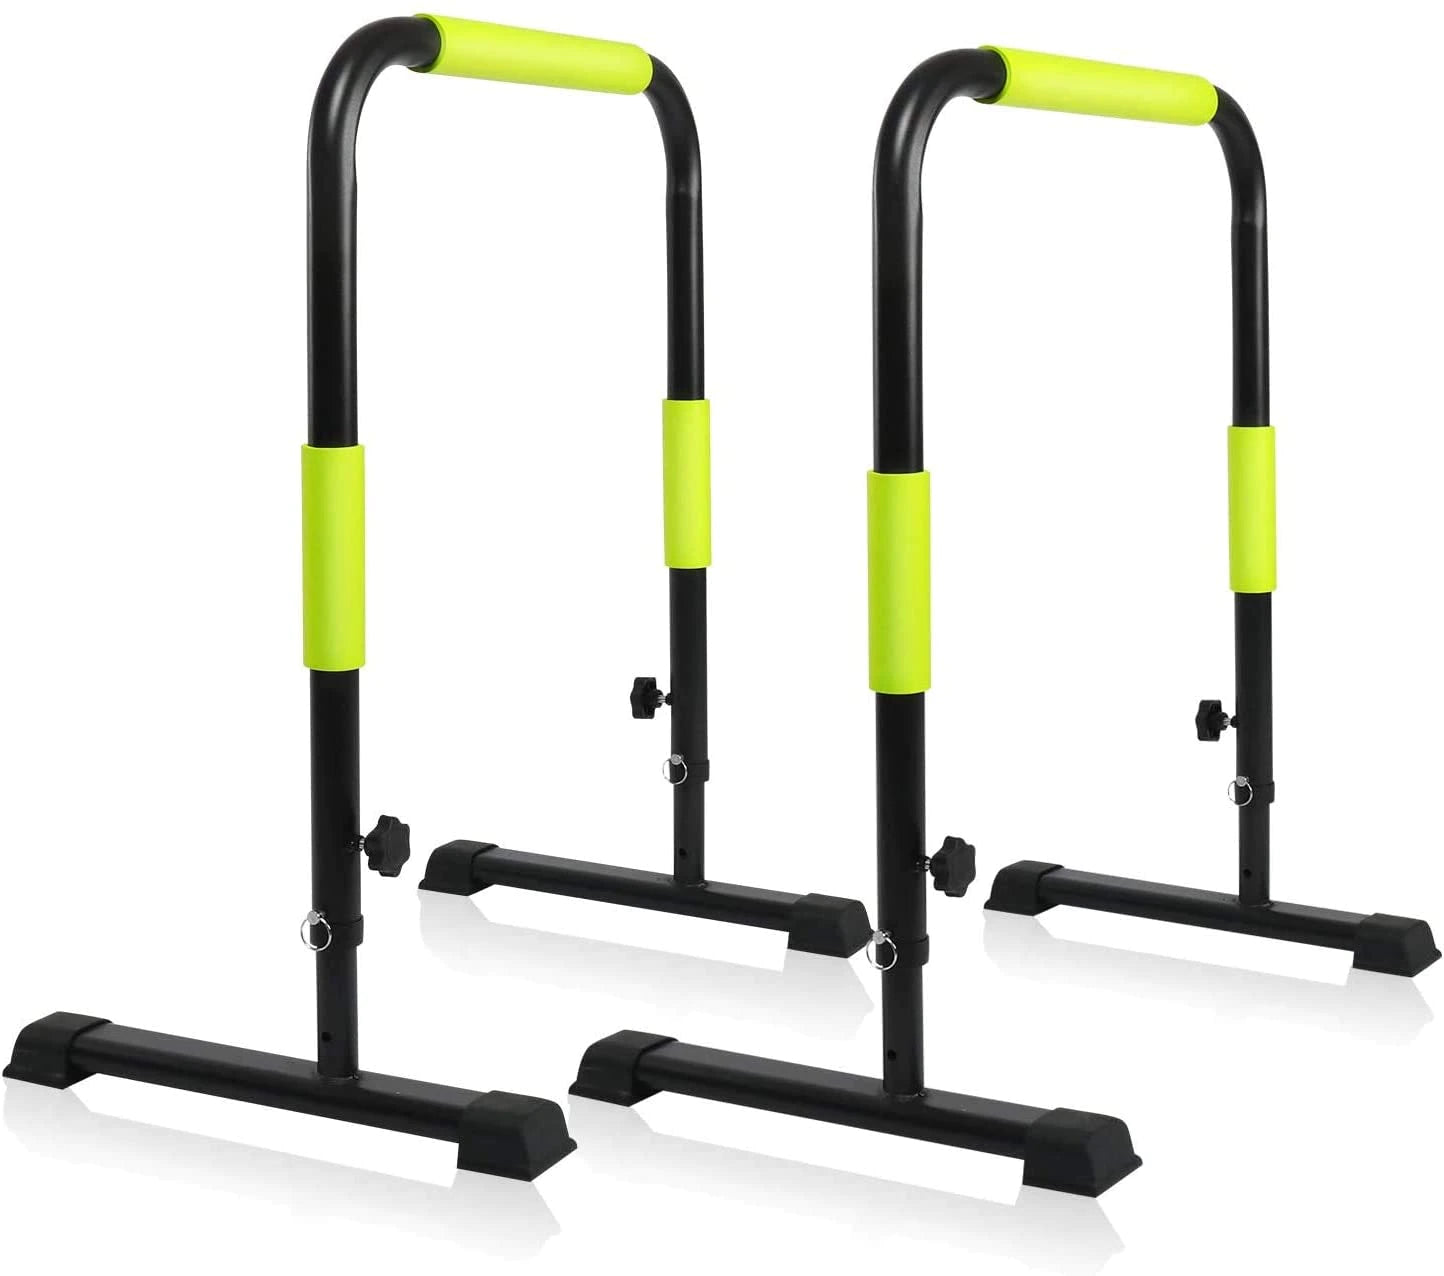 Height Adjustable Push up Stand Parallettes Dip Bar Station Heavy Duty Body Press Bar Strength Training Equipment for Home Gym